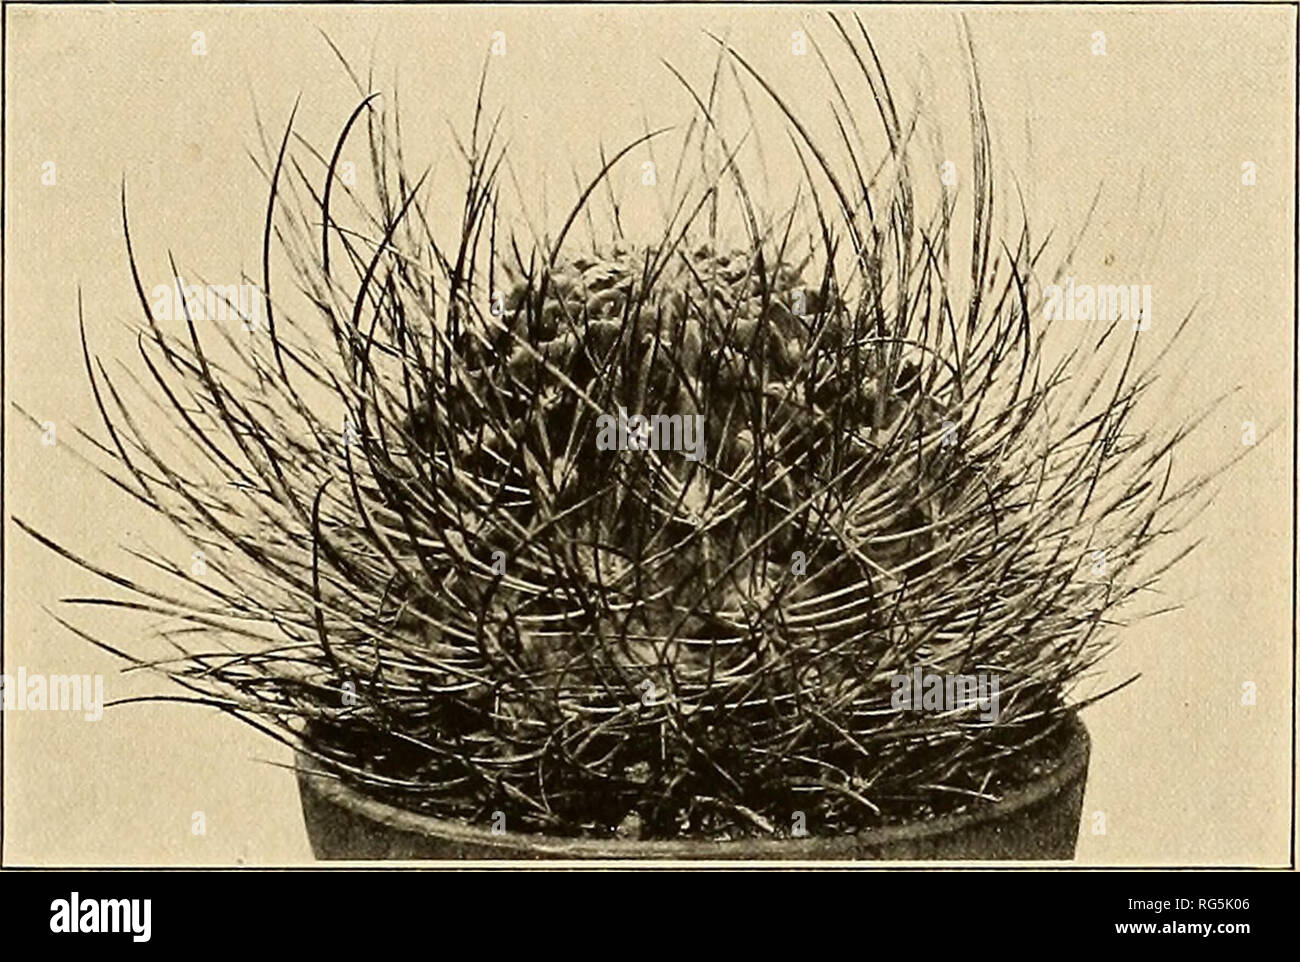 . The Cactaceae : descriptions and illustrations of plants of the cactus family. LOB IVI A. 51 still persists, but it has never flowered. We are disposed to refer here an illustration (Illustr. Hort. 6: pi. 214) which was called Echinopsis pentlandii. Figure 63 is from a photograph of a plant brought by Dr. Rose from the type locality in 1914.. Fig. 63.—Lobivia ferox. 3. Lobivia longispina sp. nov. Globose to cylindric, 10 cm. in diameter, up to 25 cm. high, bluish green; ribs 25 to 50, rather low, deeply undulate, broken into acute tubercles 1 to 2 cm. long; spines 10 to 15, slender, elongate Stock Photo